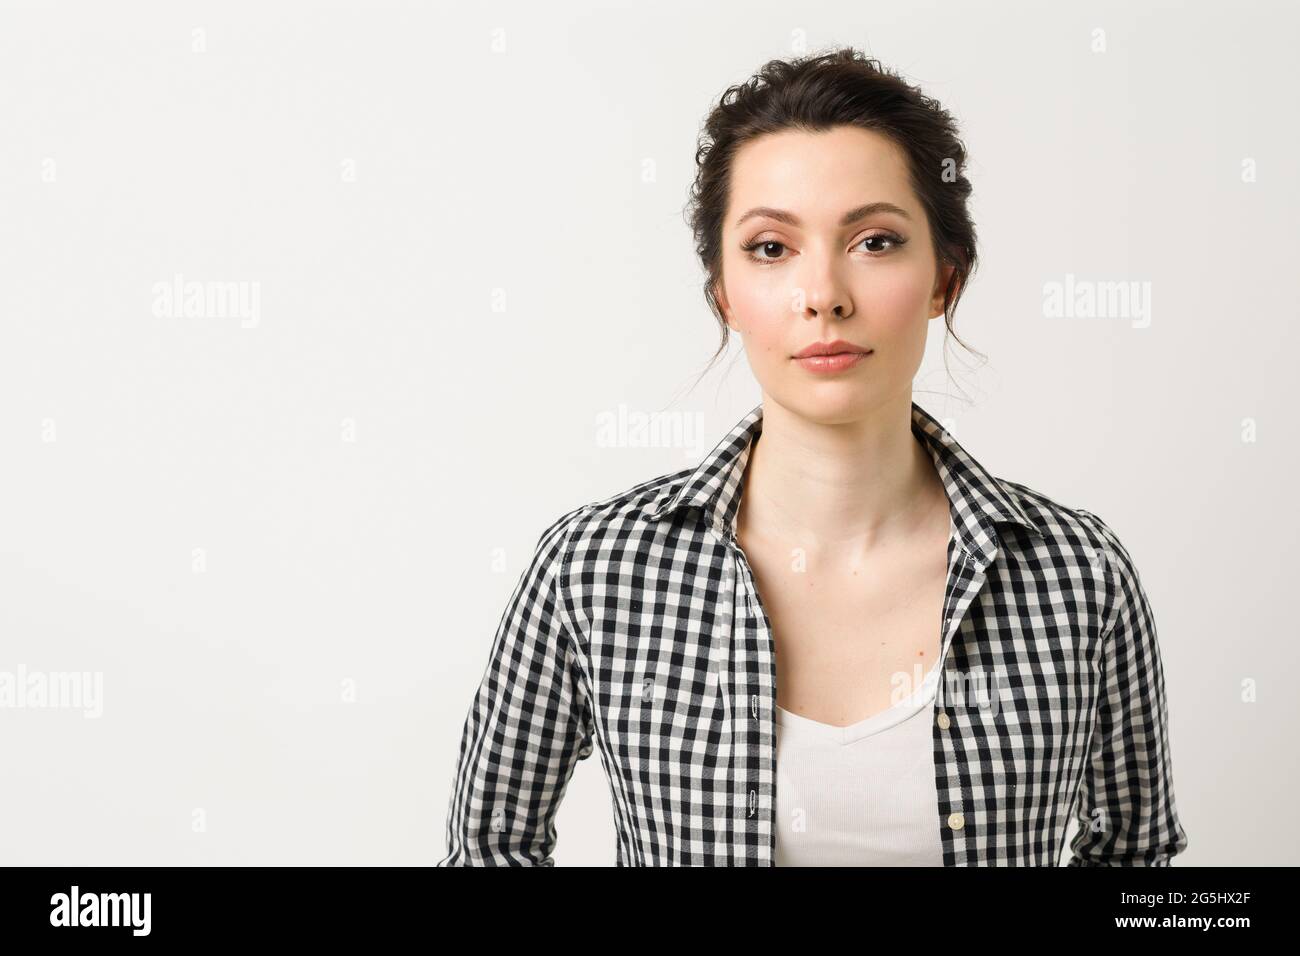 Portrait of a young woman. A charming brunette looks at the camera. Stock Photo